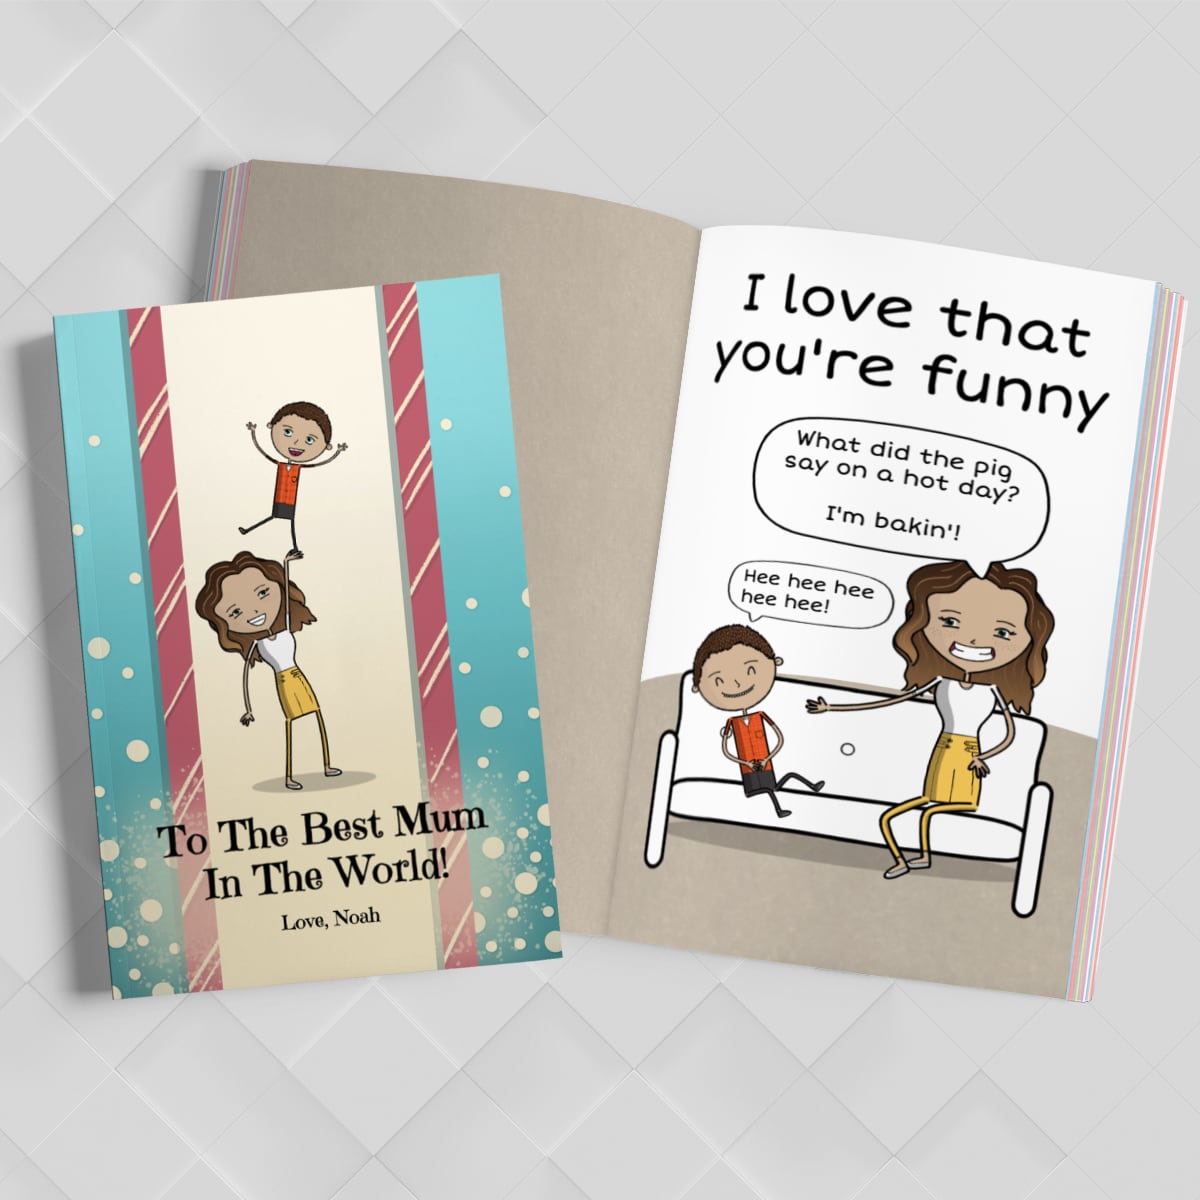 Personalized Mum's Day Love Book from Kids